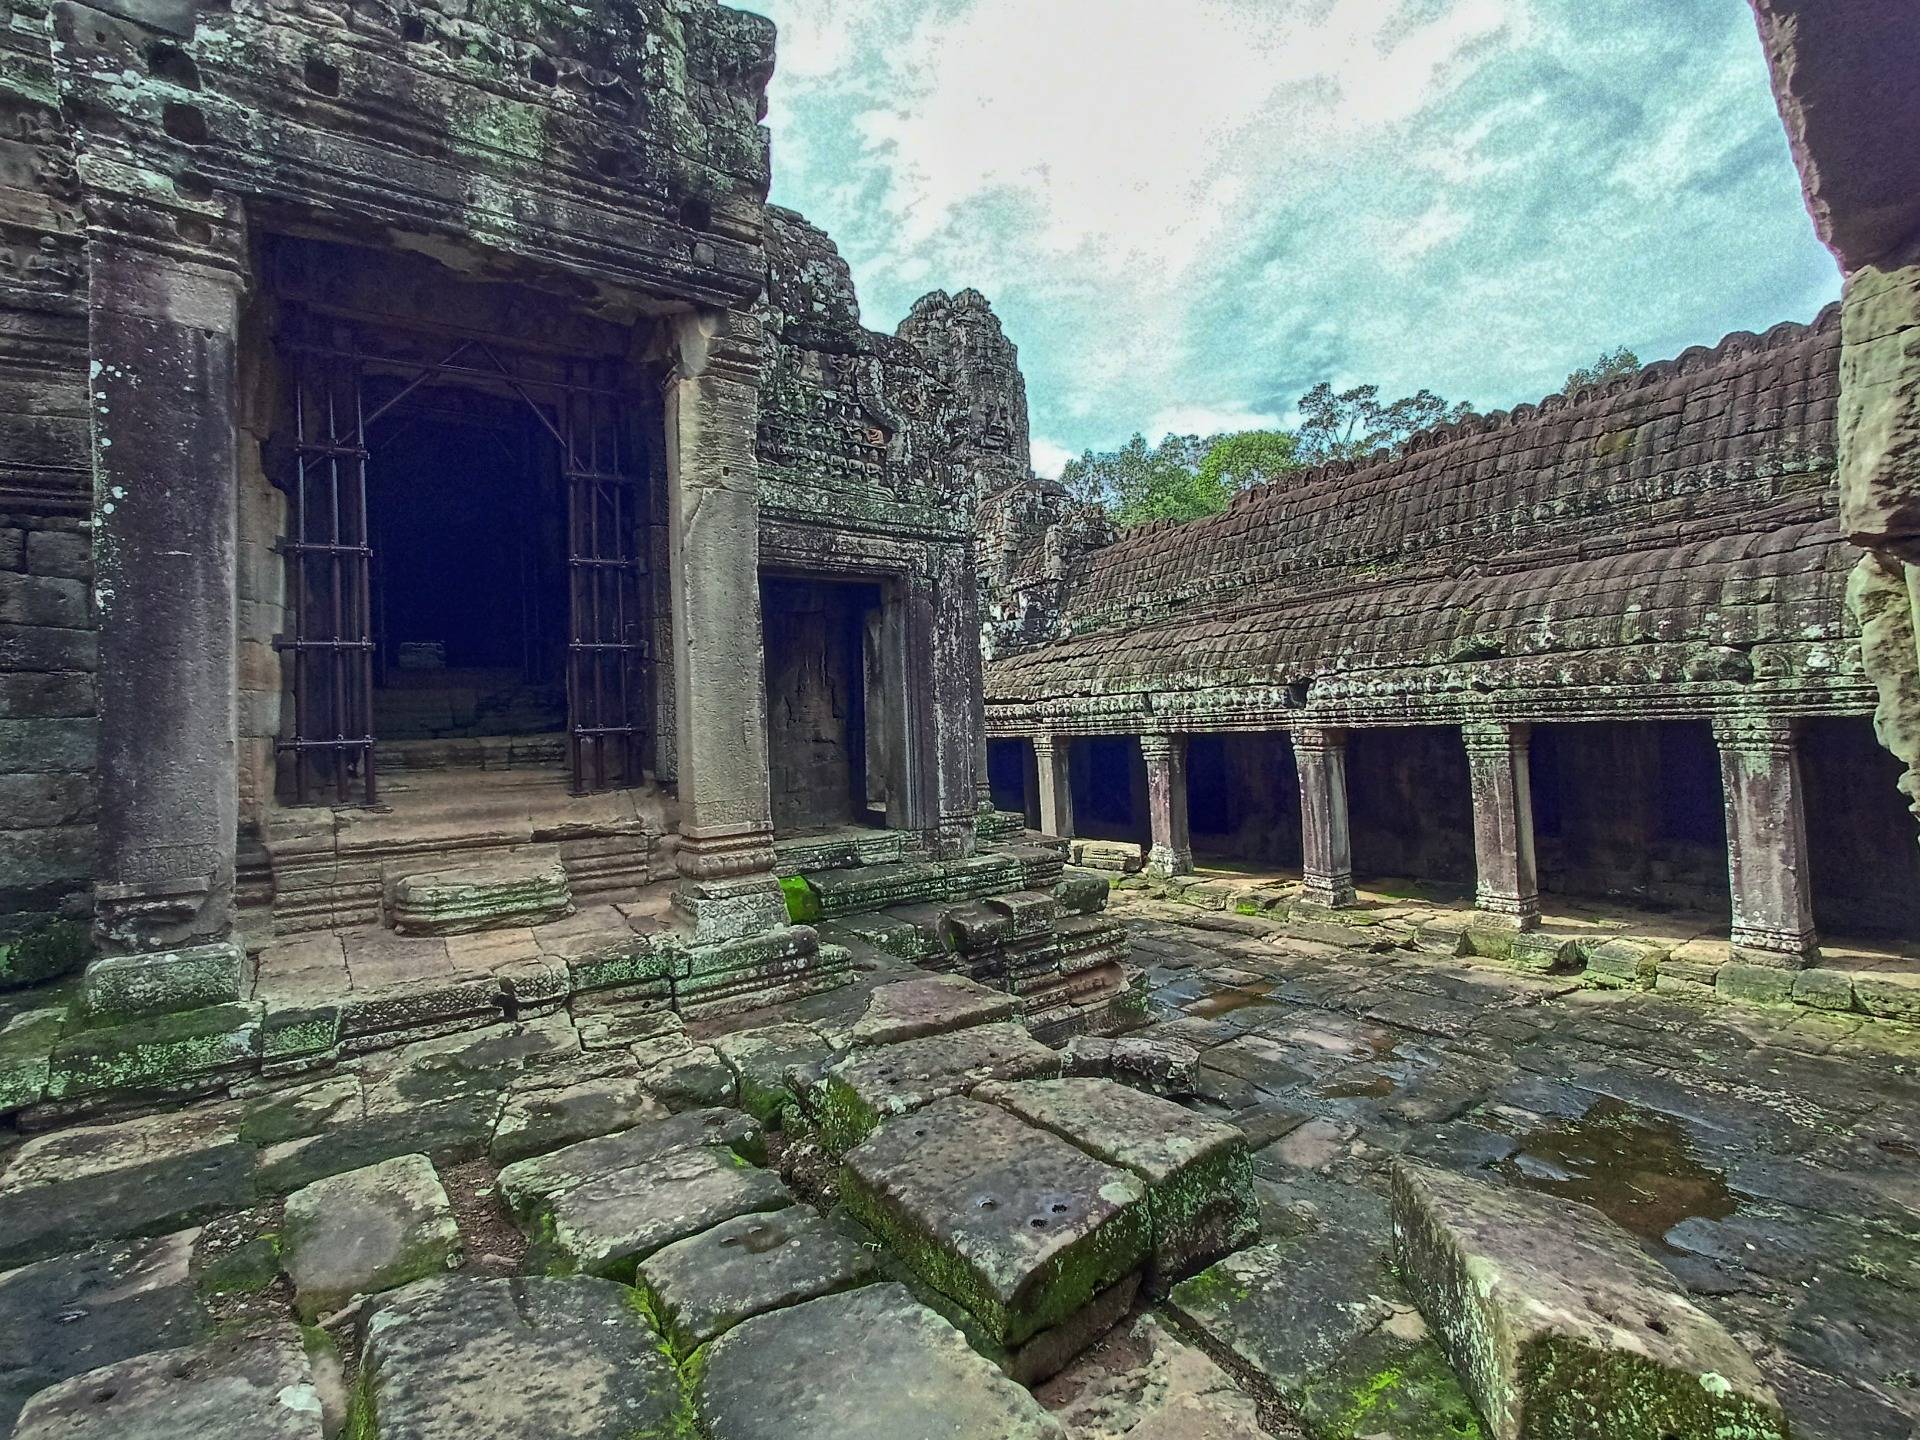 Slippery when wet. Be careful if you visit Angkor Thom during the rain.